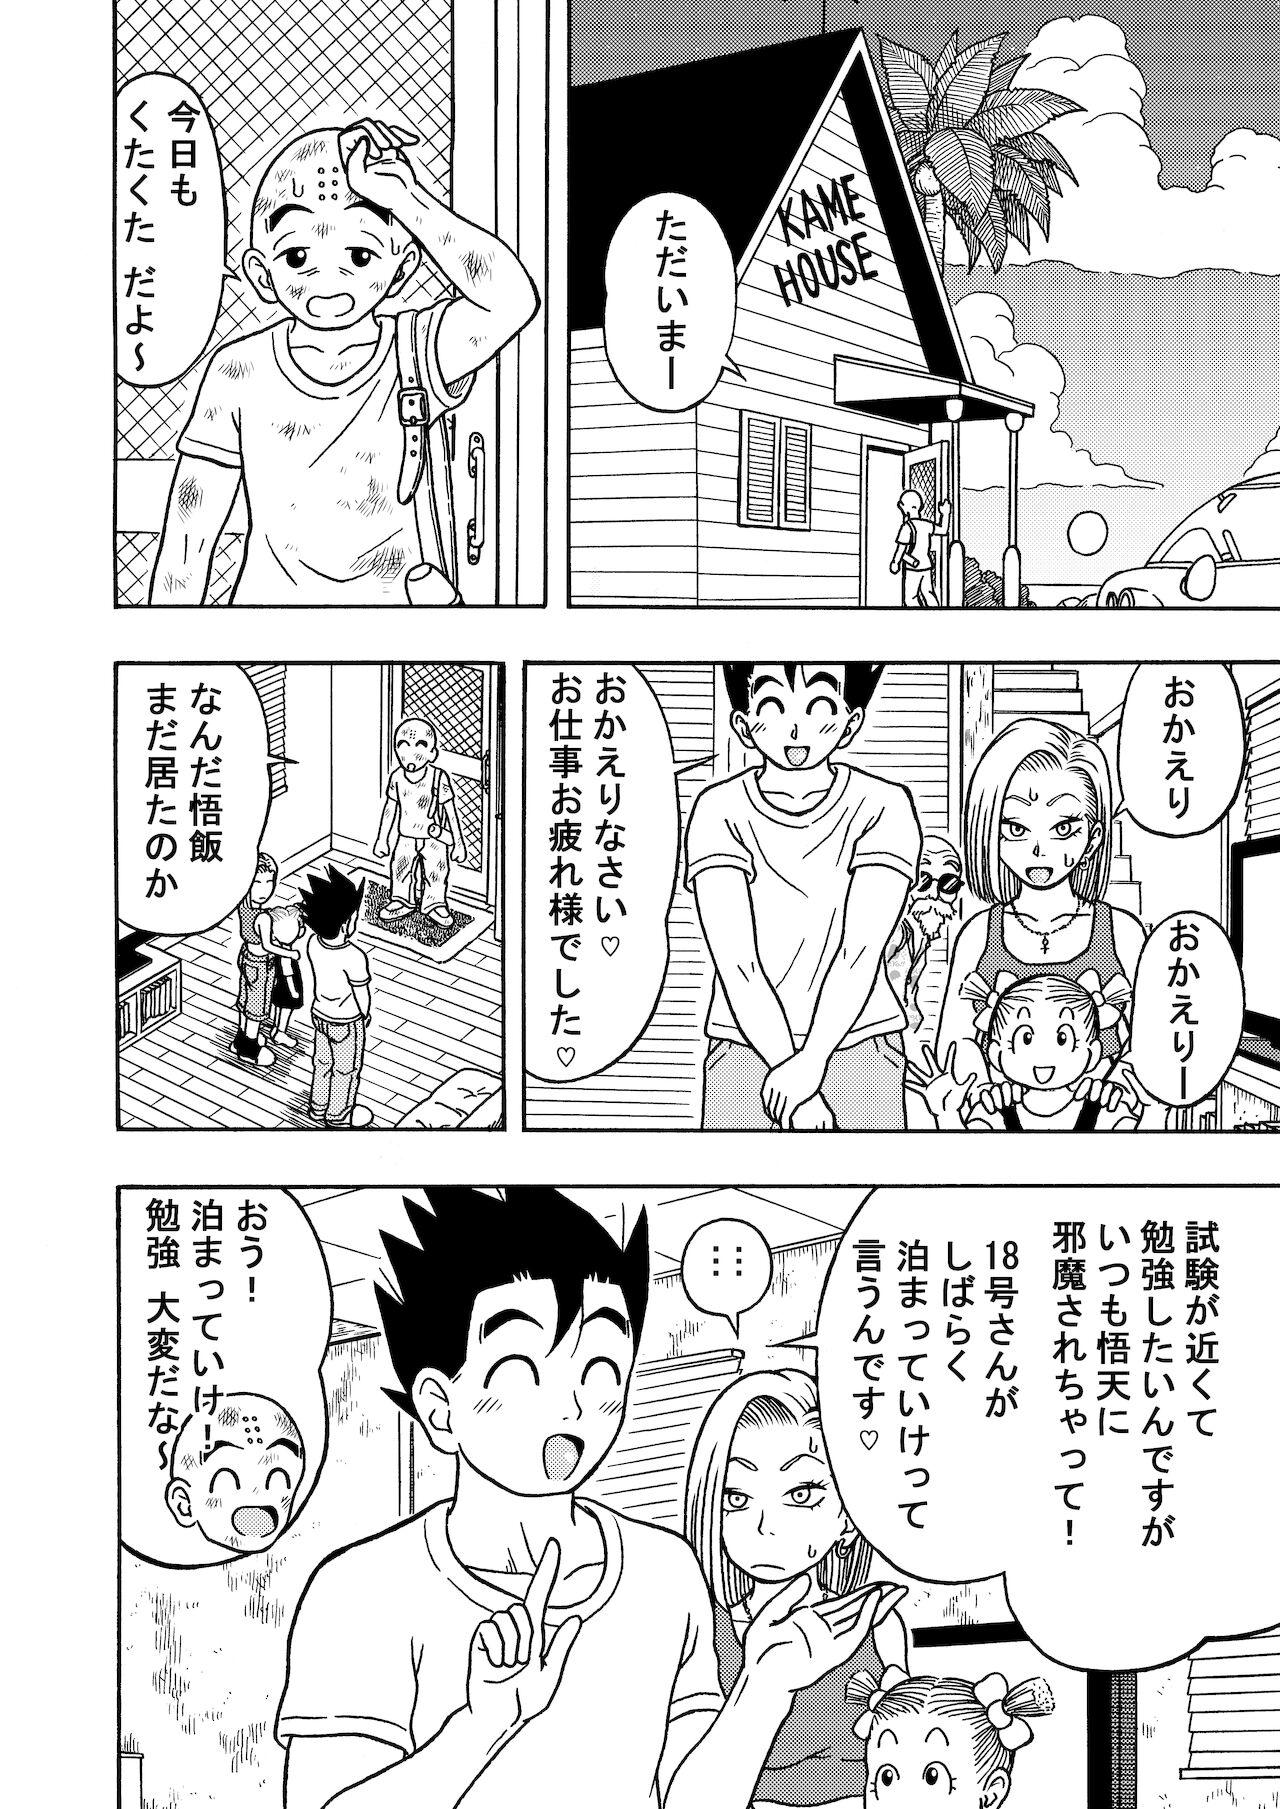 Roughsex 18's NTR pies on parade 2 - Dragon ball z Oral Sex - Page 12